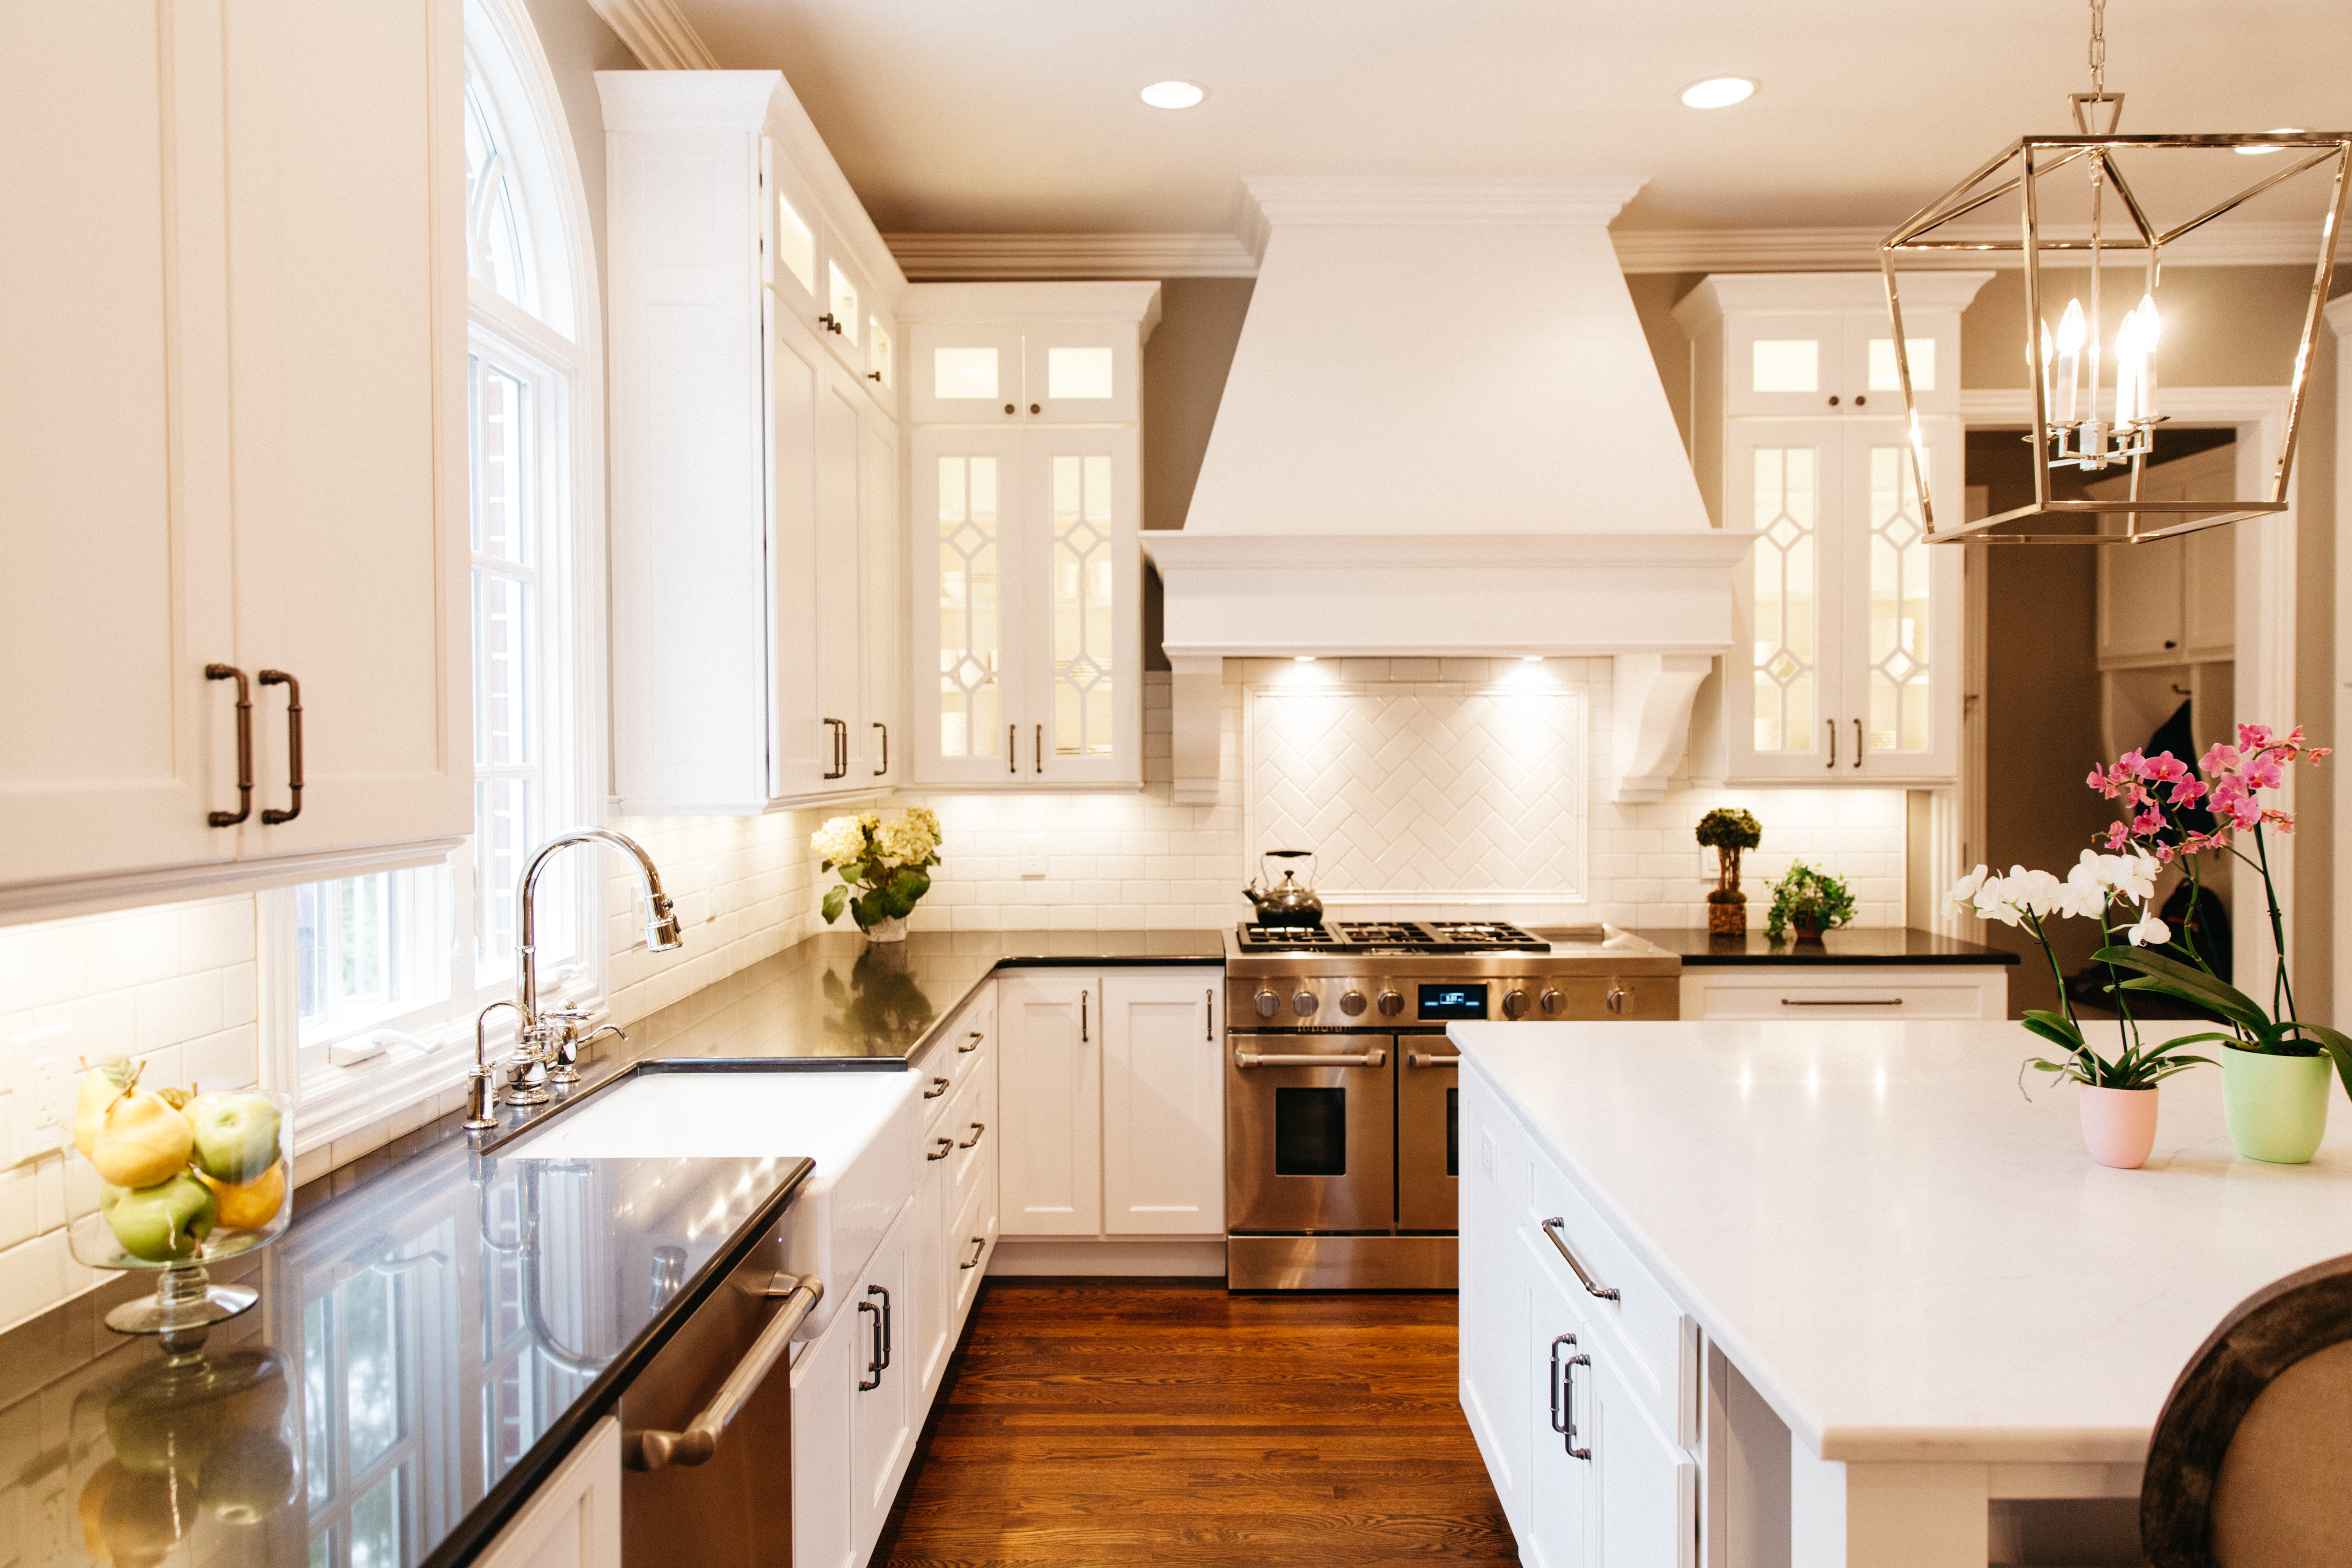 Kitchen Cabinets Costs 2020 Framed Vs Frameless Pros Cons